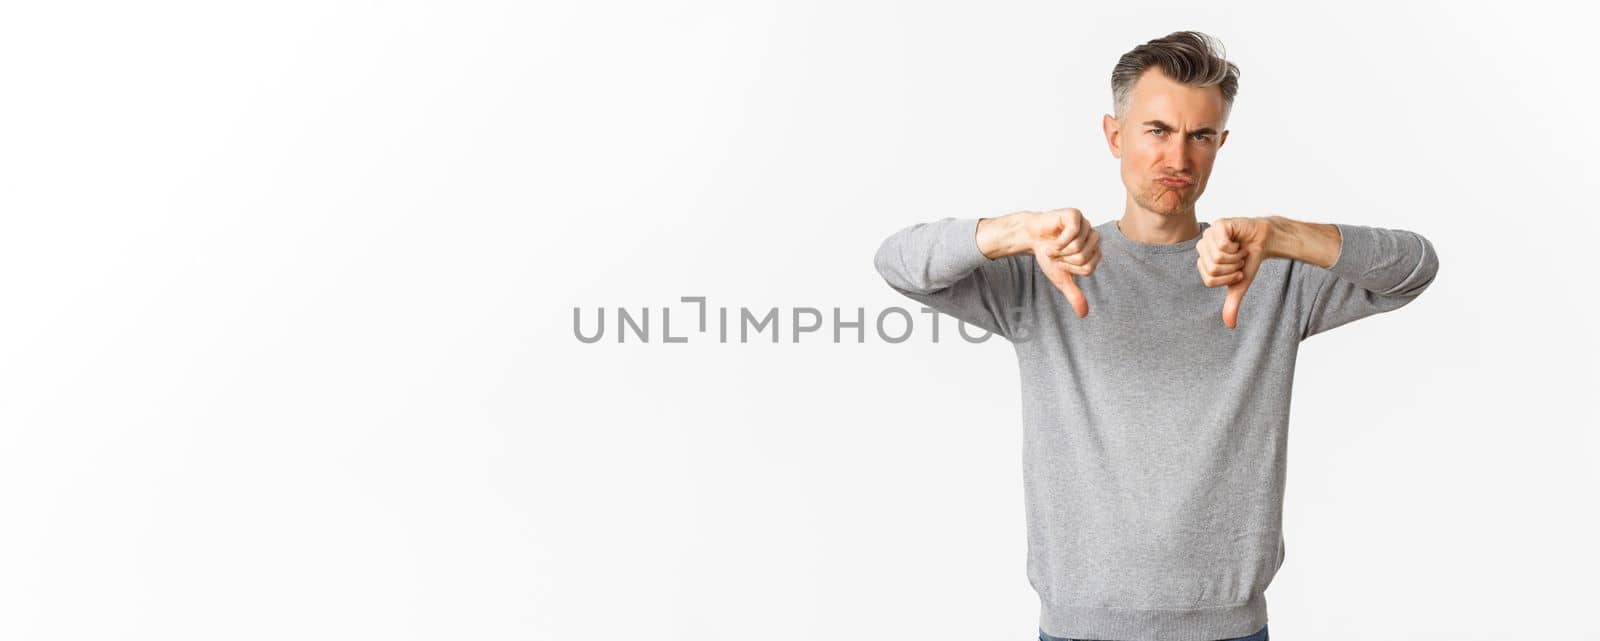 Skeptical and disappointed middle-aged man, grimacing unamused and showing thumbs-down, dislike something bad, standing over white background.